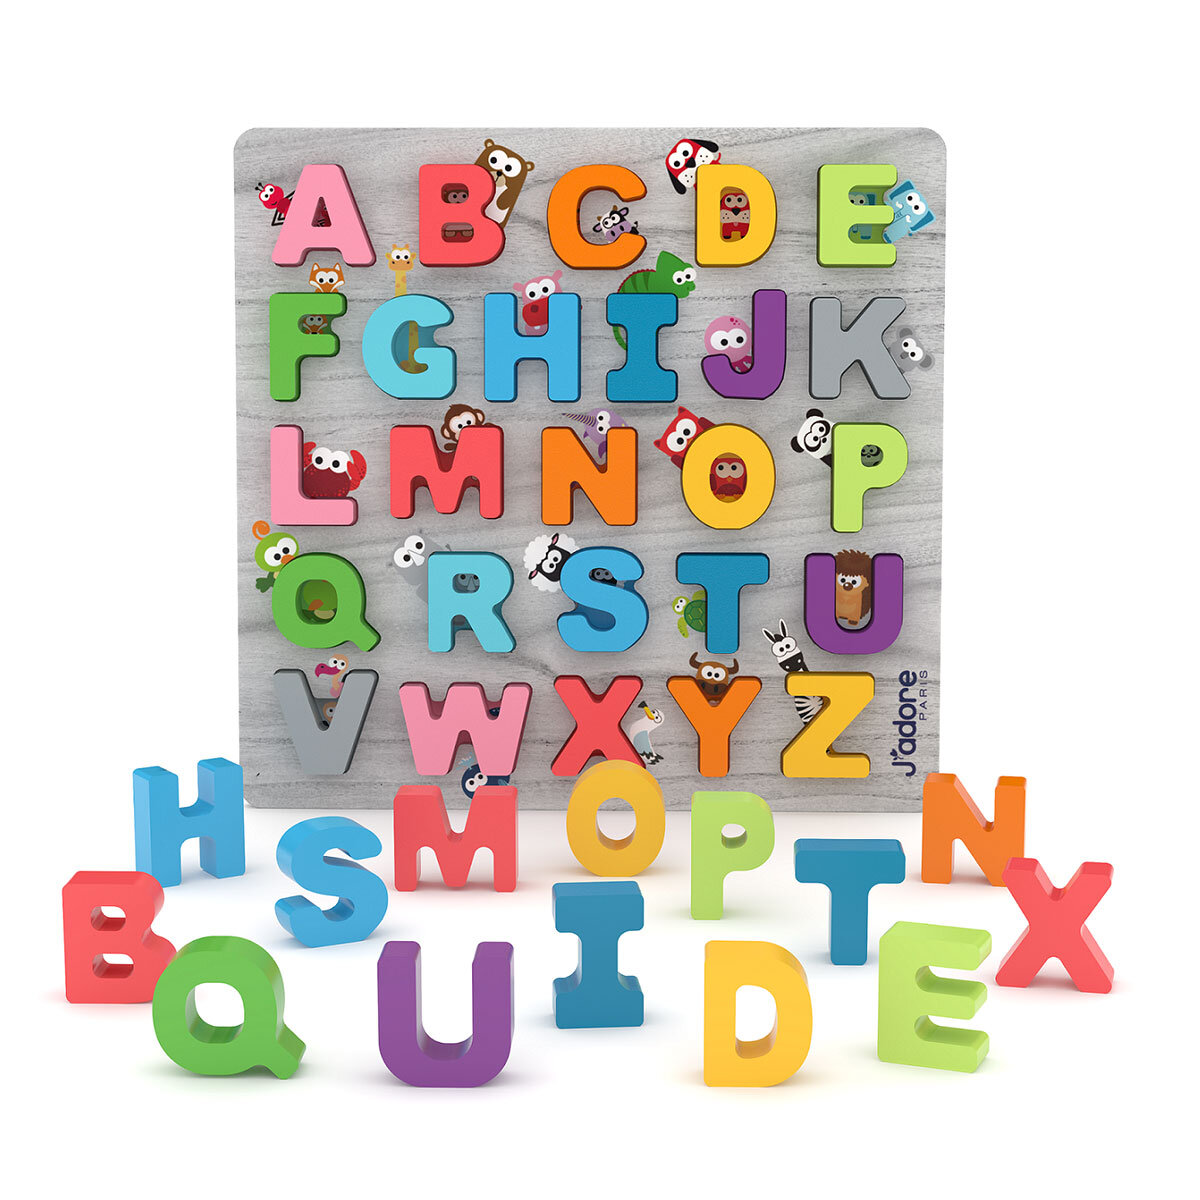 Buy J'adore Racing Track 3-in-1 Gift Set Alphabet Image at Costco.co.uk